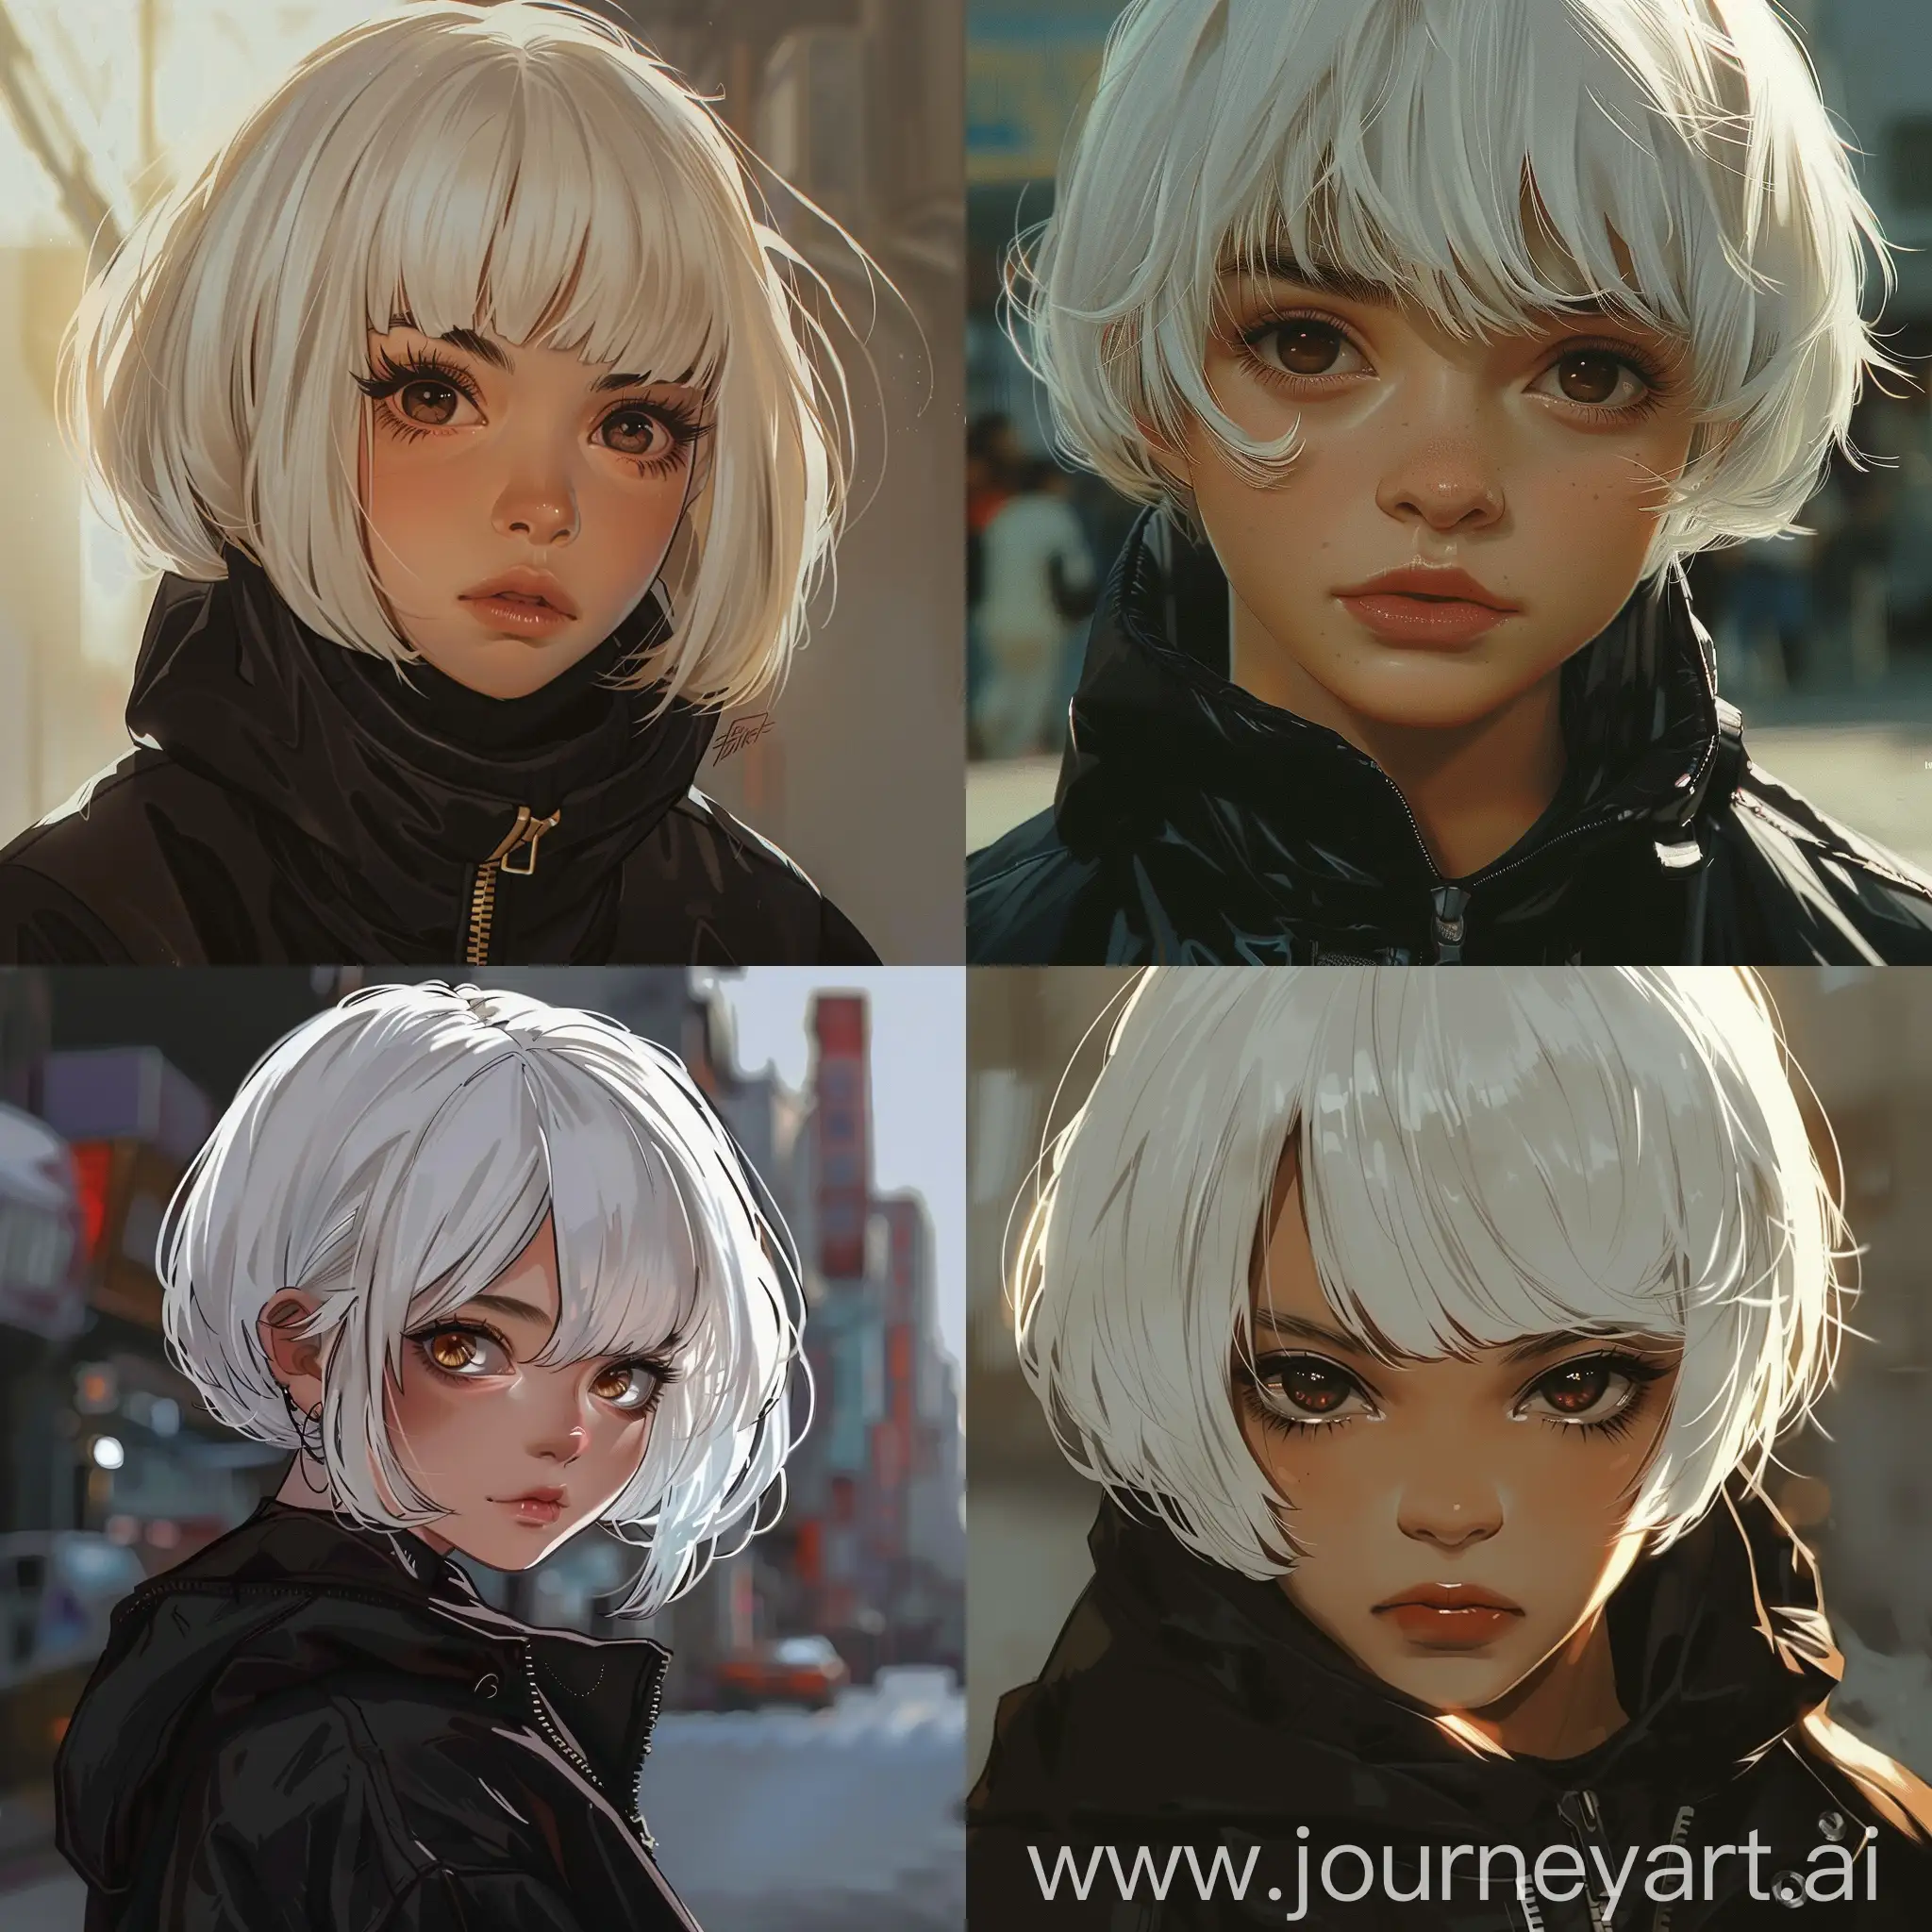 Stylish-Anime-Woman-with-Short-White-Hair-in-Retro-Street-Setting